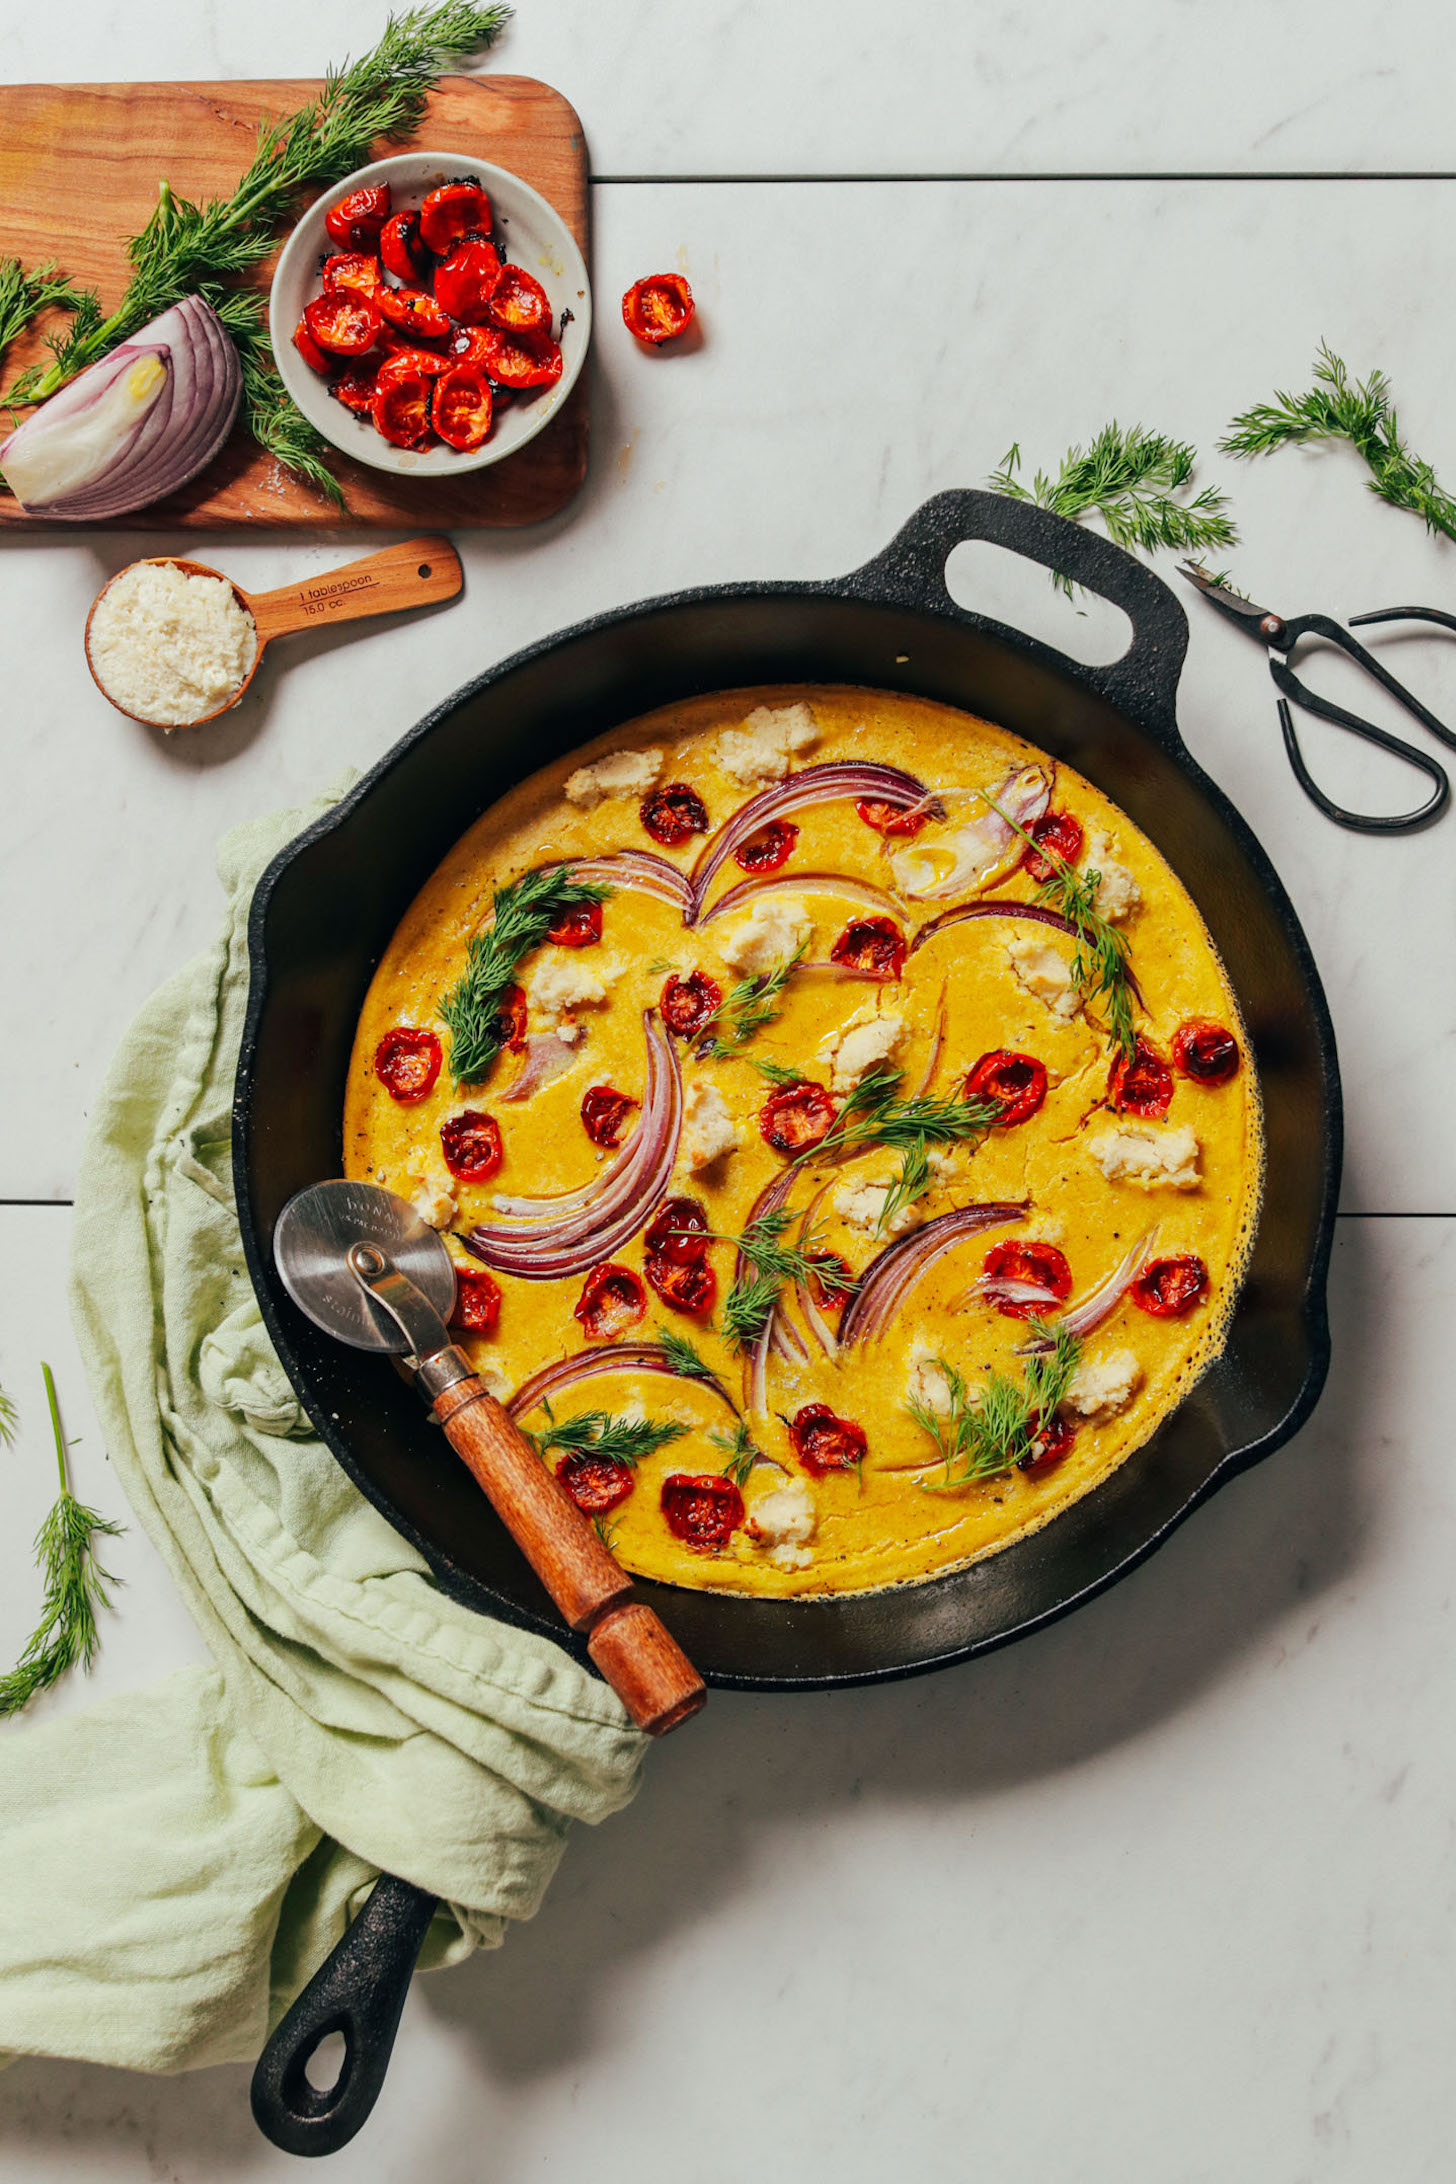 https://minimalistbaker.com/wp-content/uploads/2019/06/DELICIOUS-Vegan-Frittata-made-with-Mung-Beans-10-ingredients-protein-and-fiber-RICH-flavorful-and-SO-delicious-plantbased-frittata-breakfast-glutenfree-minimalistbaker-recipe-6.jpg